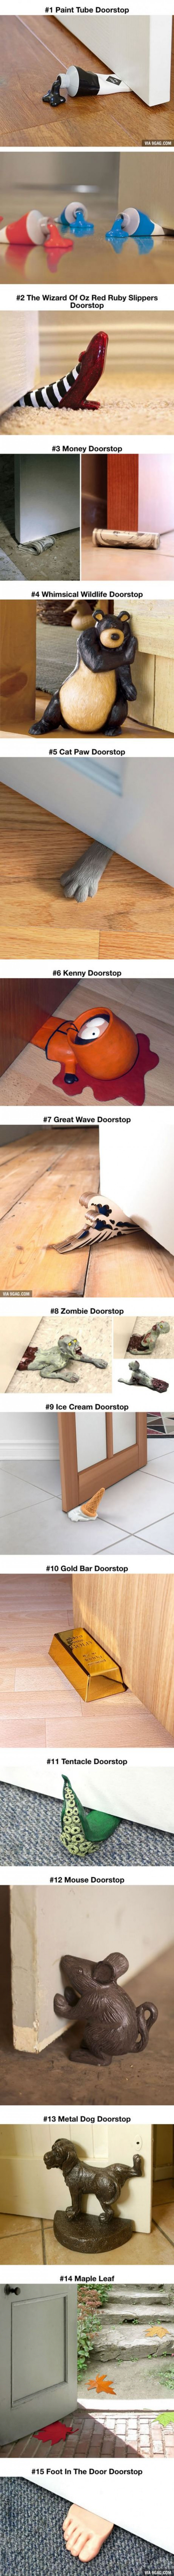 15 Creative Doorstops, You've Never Wanted A Doorstop This Much